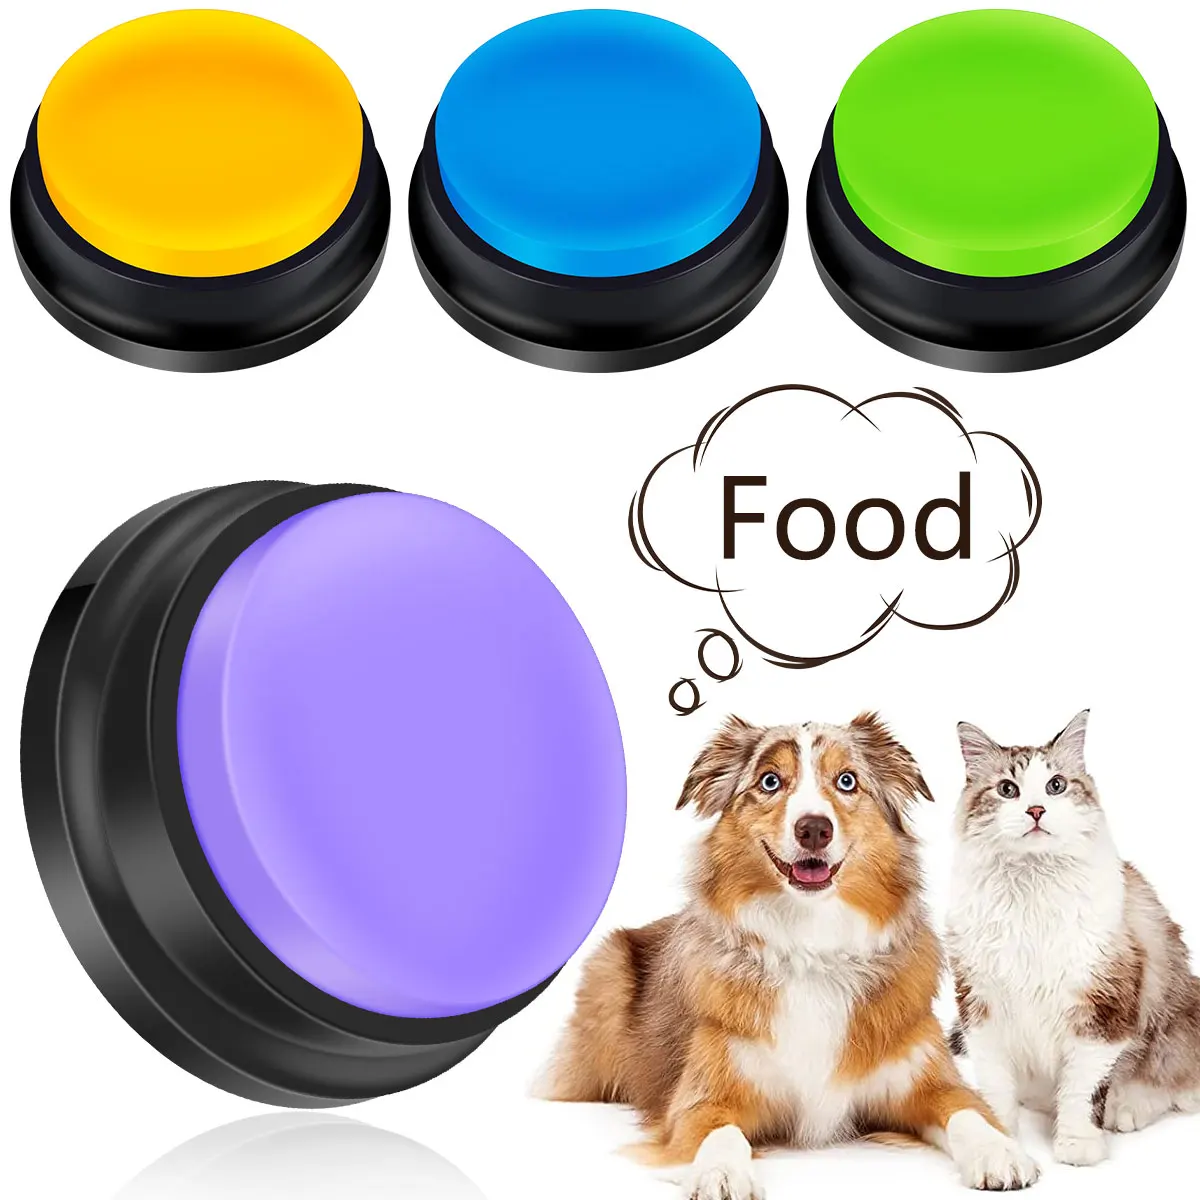 

L 4Pcs Dog Button Pet Communication Button Pet Training Buzzer Battery Operated Recordable Small Clear Talking Button Portable